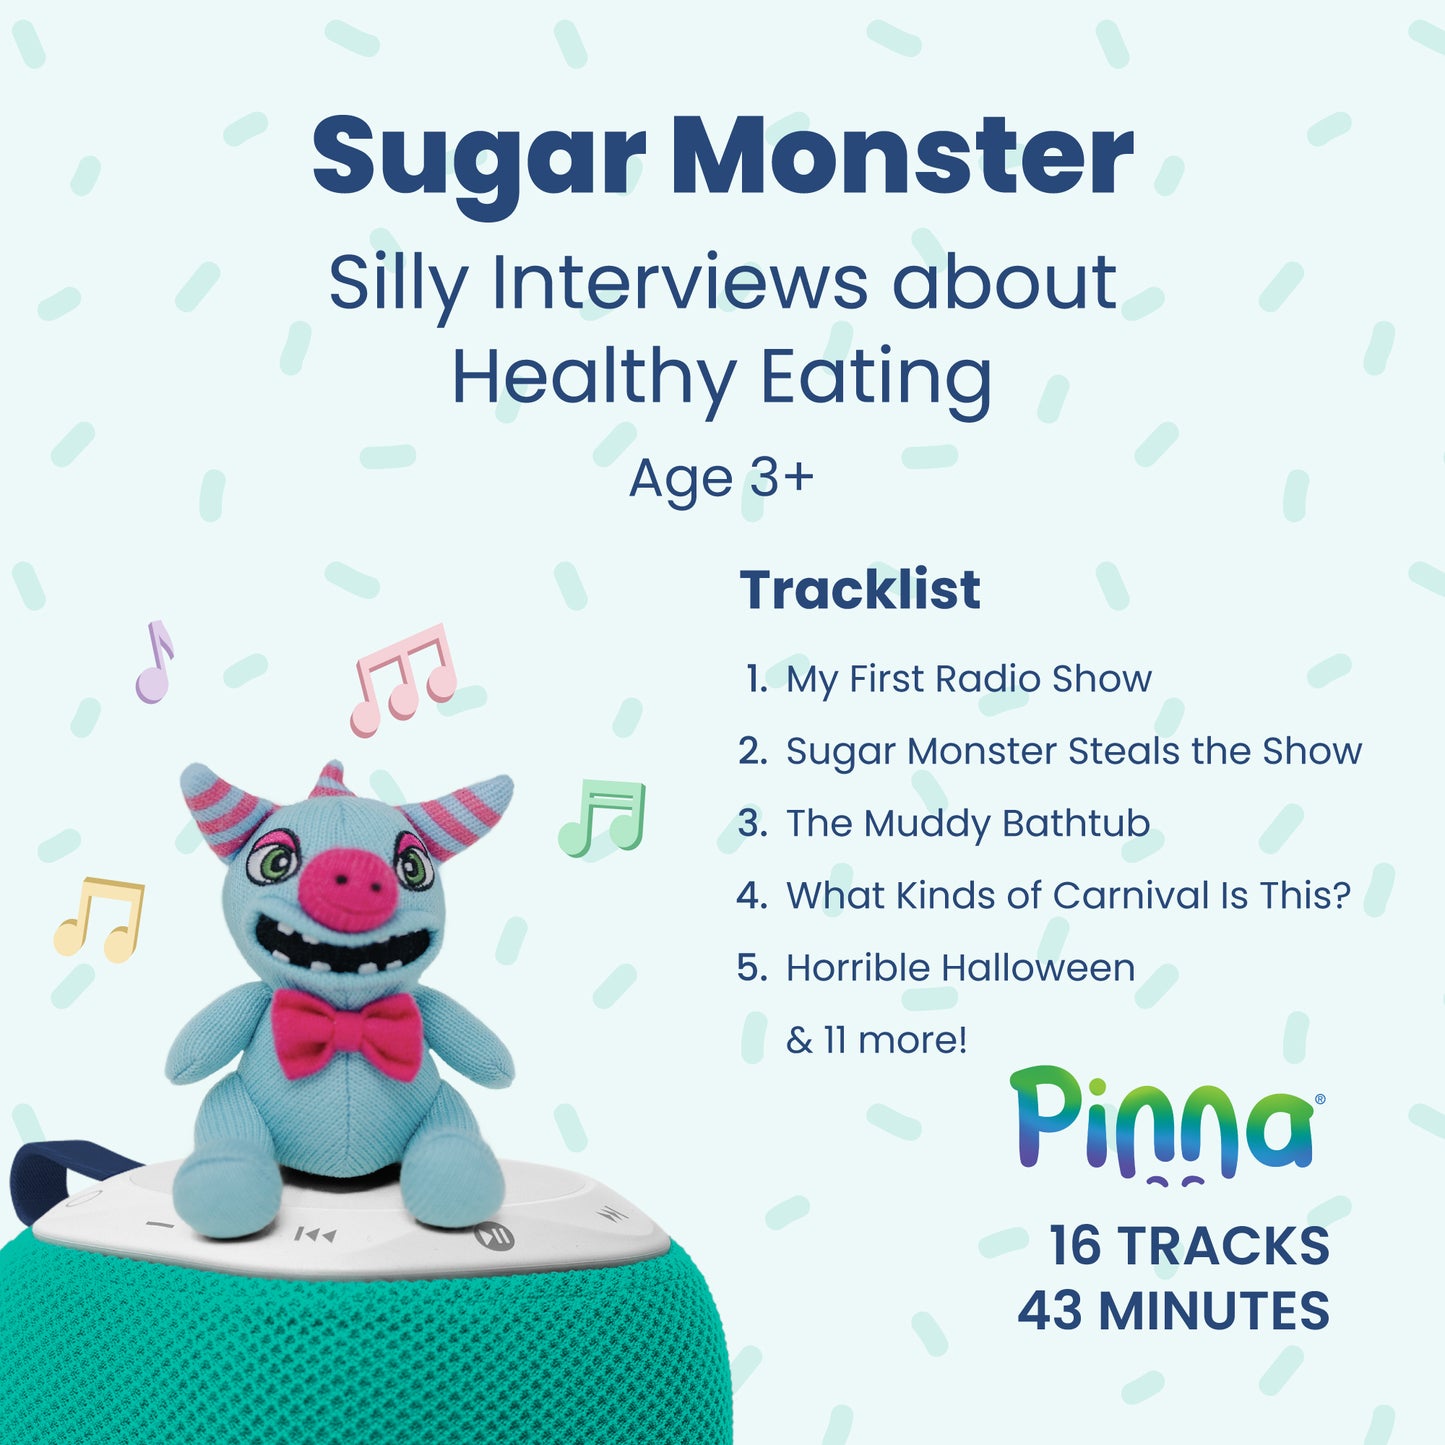 Molly and the Sugar Monster